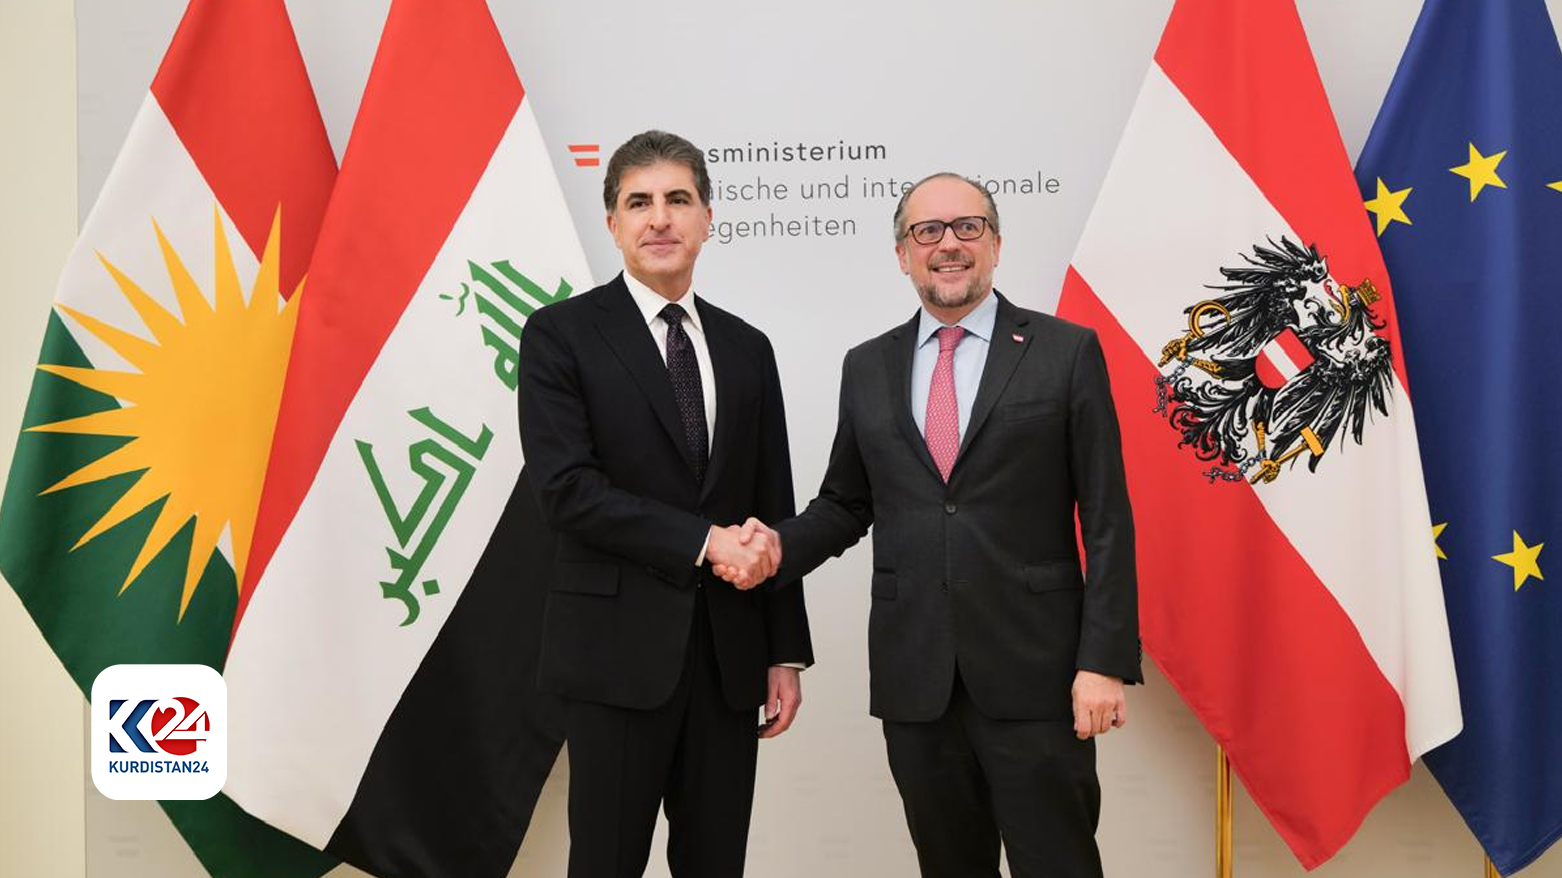 Nechirvan Barzani visits Germany to participate in the MSC